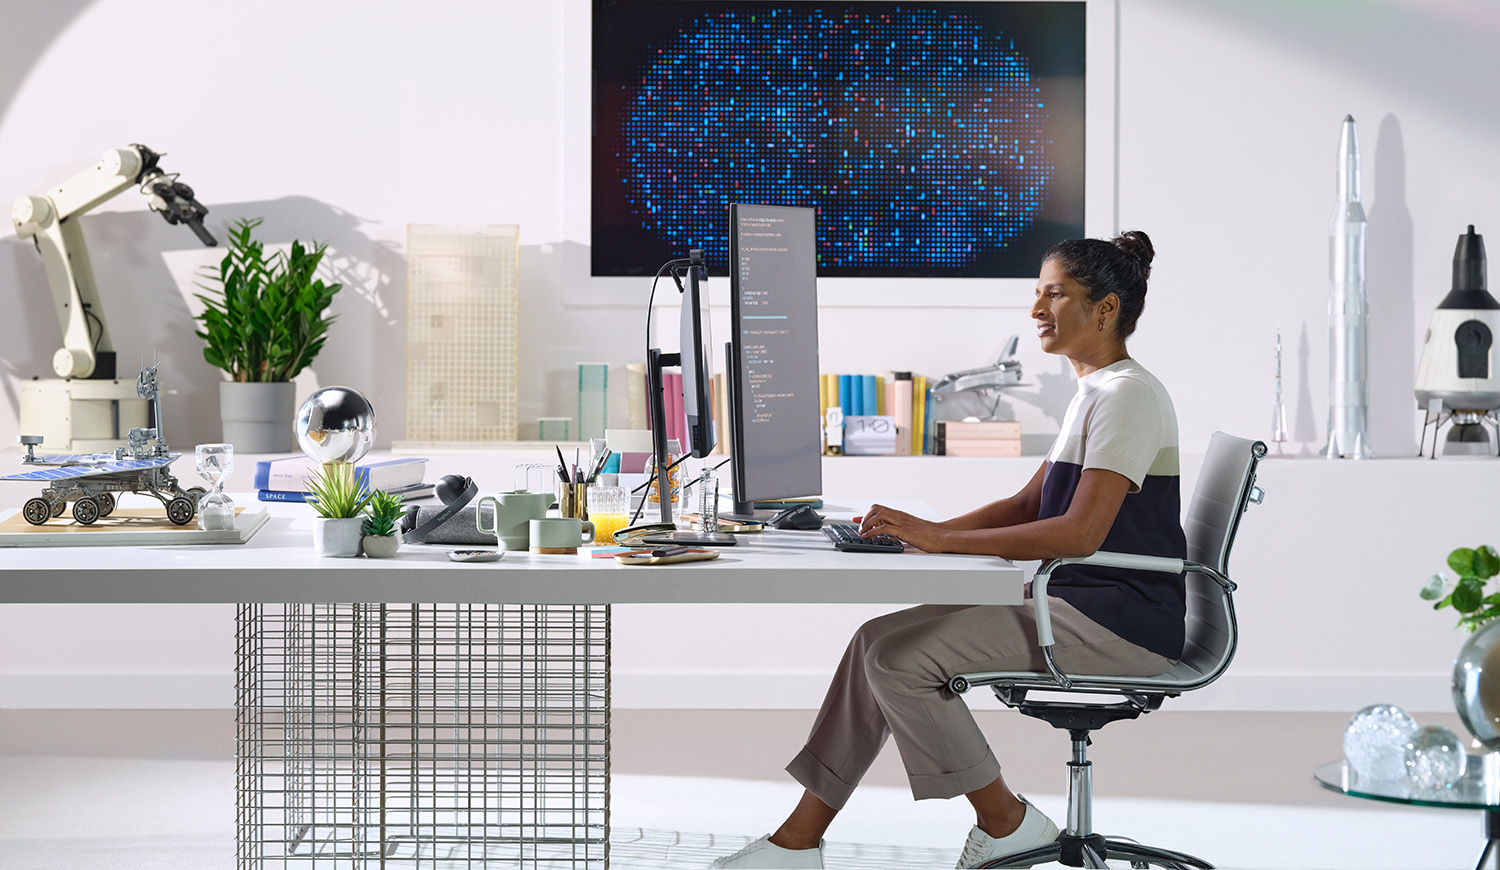 Image of woman working on office